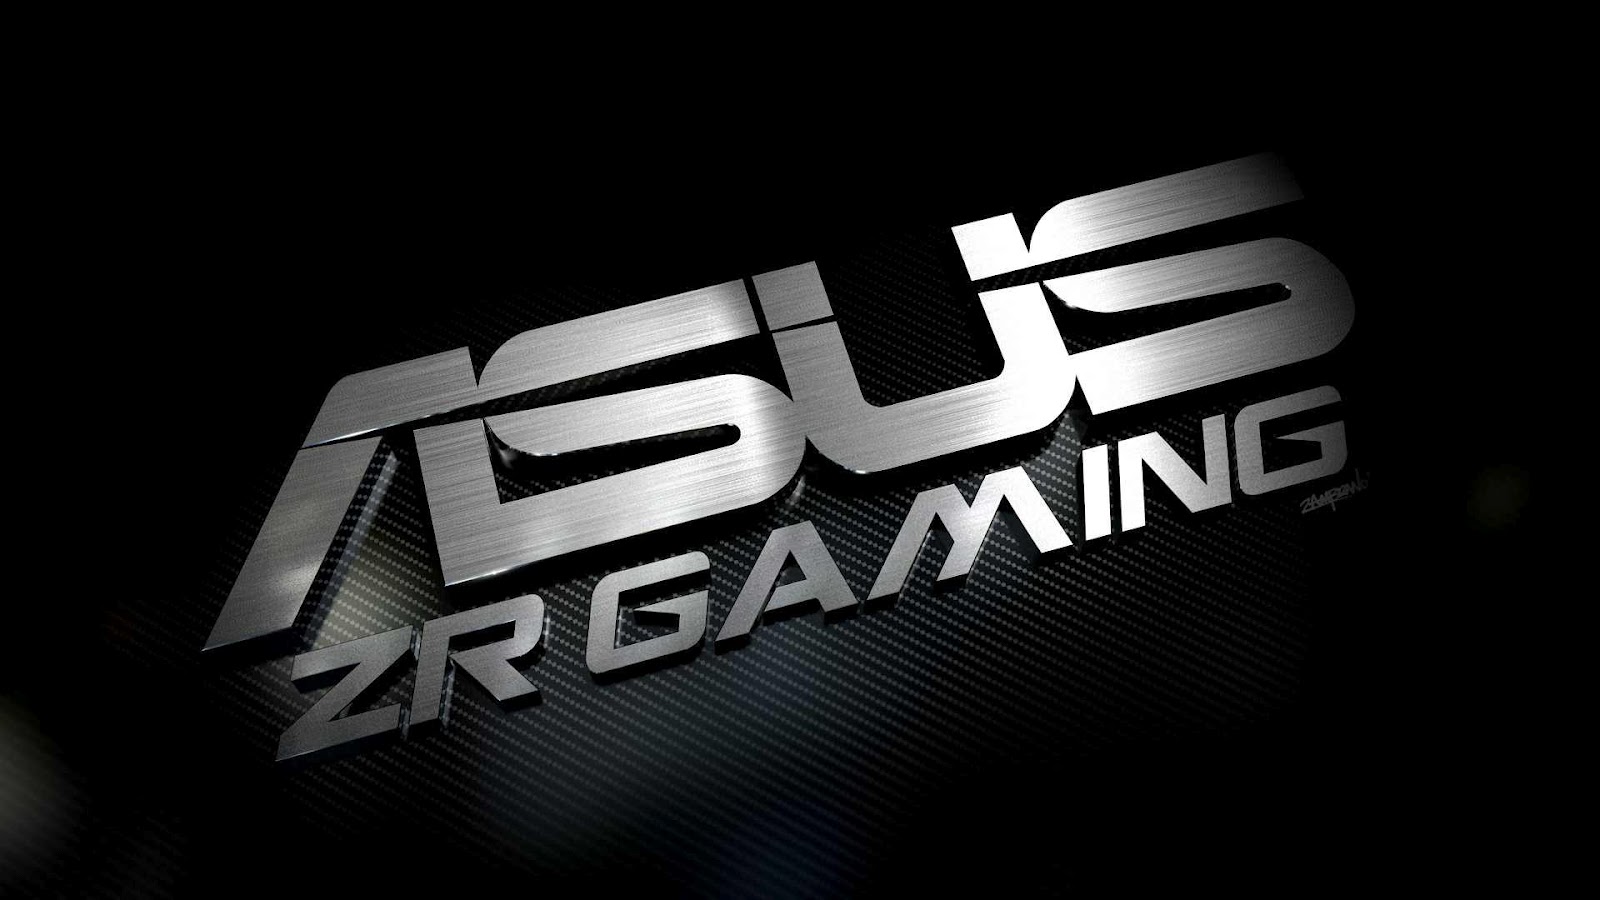  Hd Wallpapers Asus HD Wallpapers 1600x900